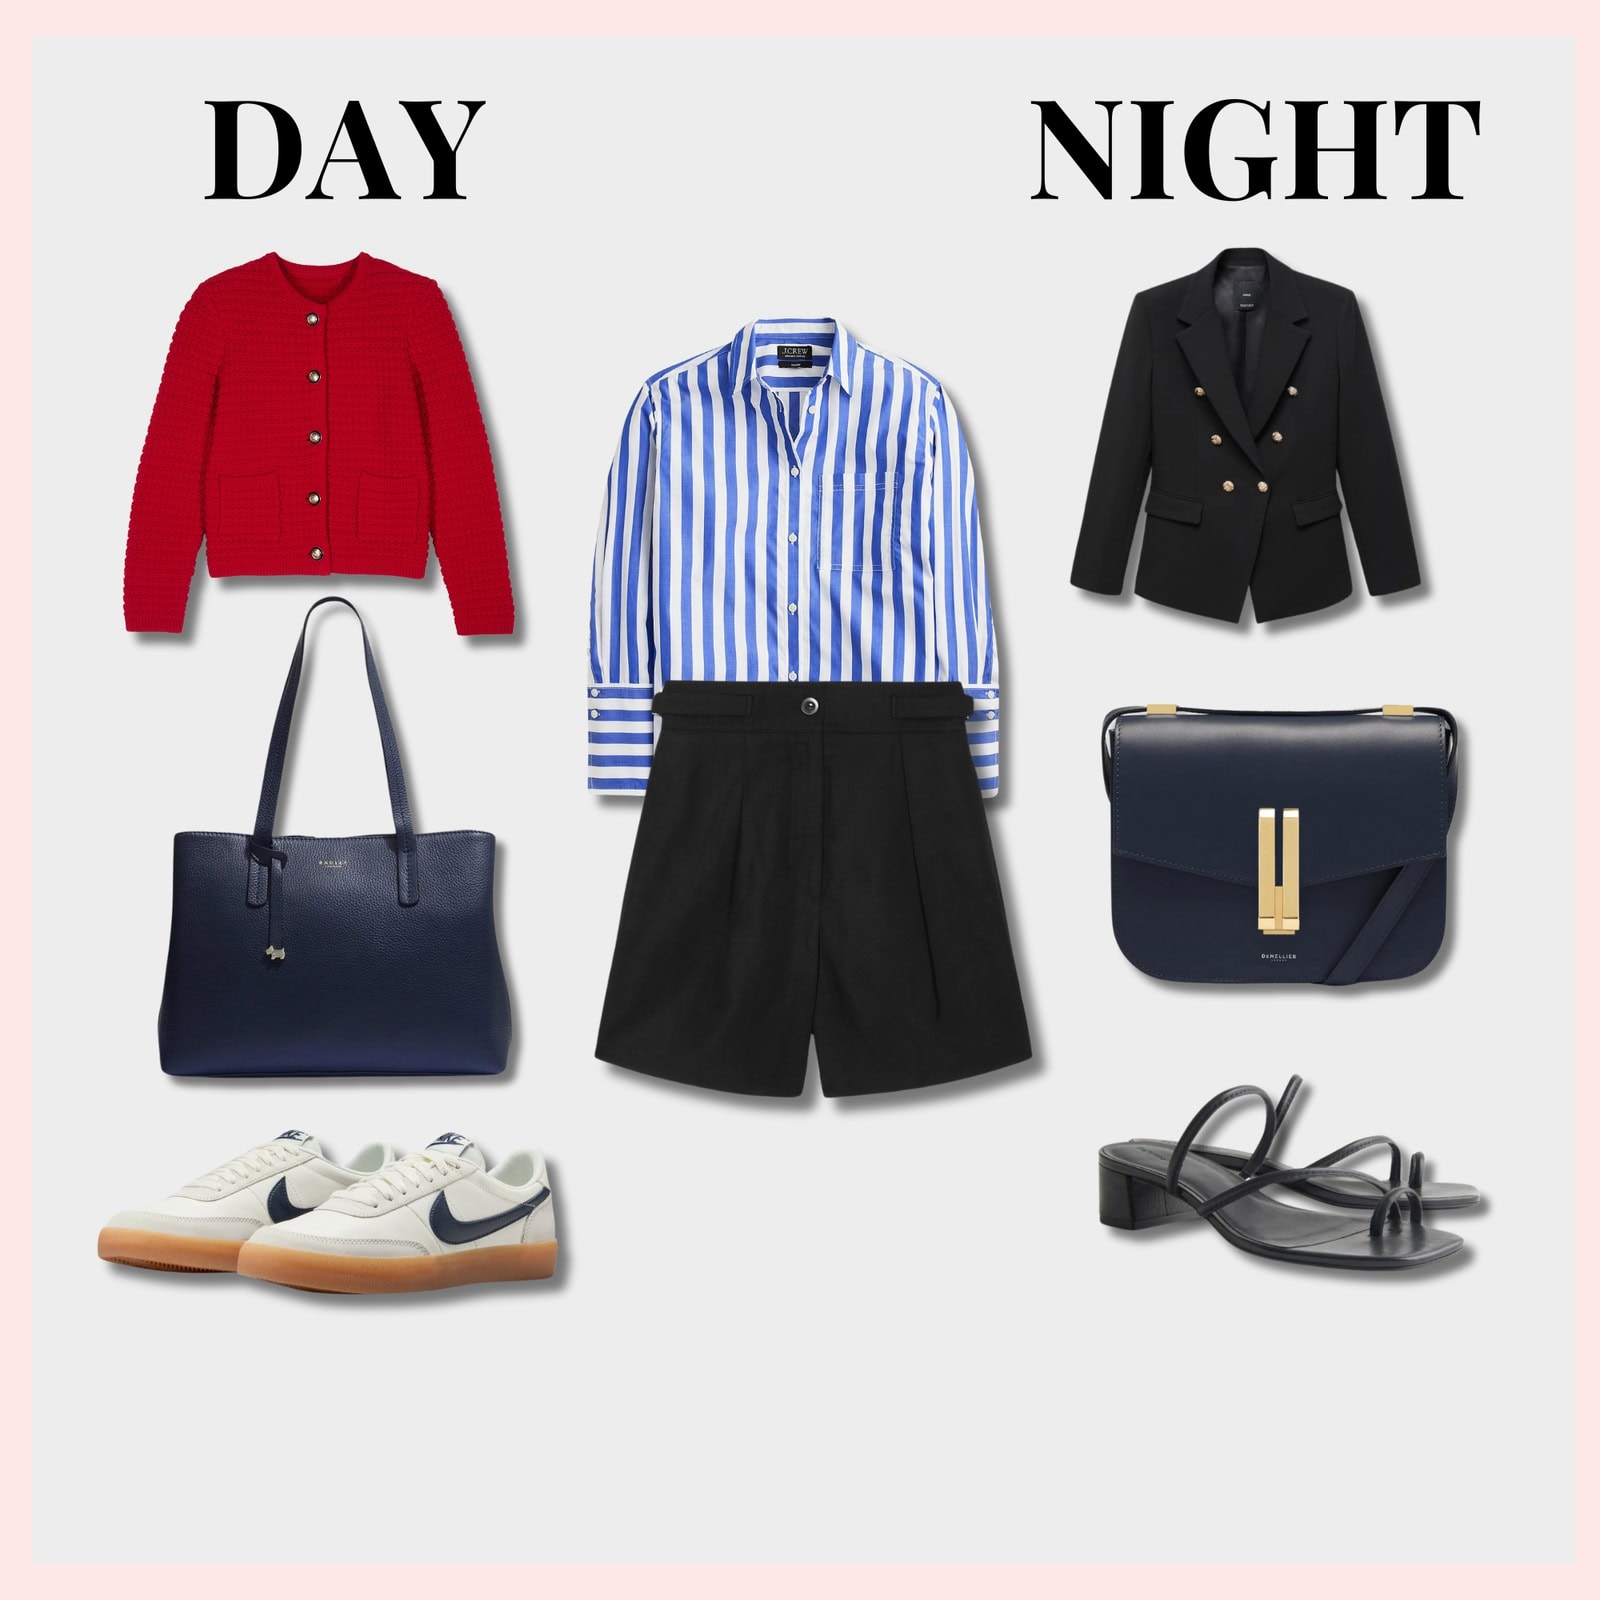 City Getaway Outfit Ideas for Day and Night